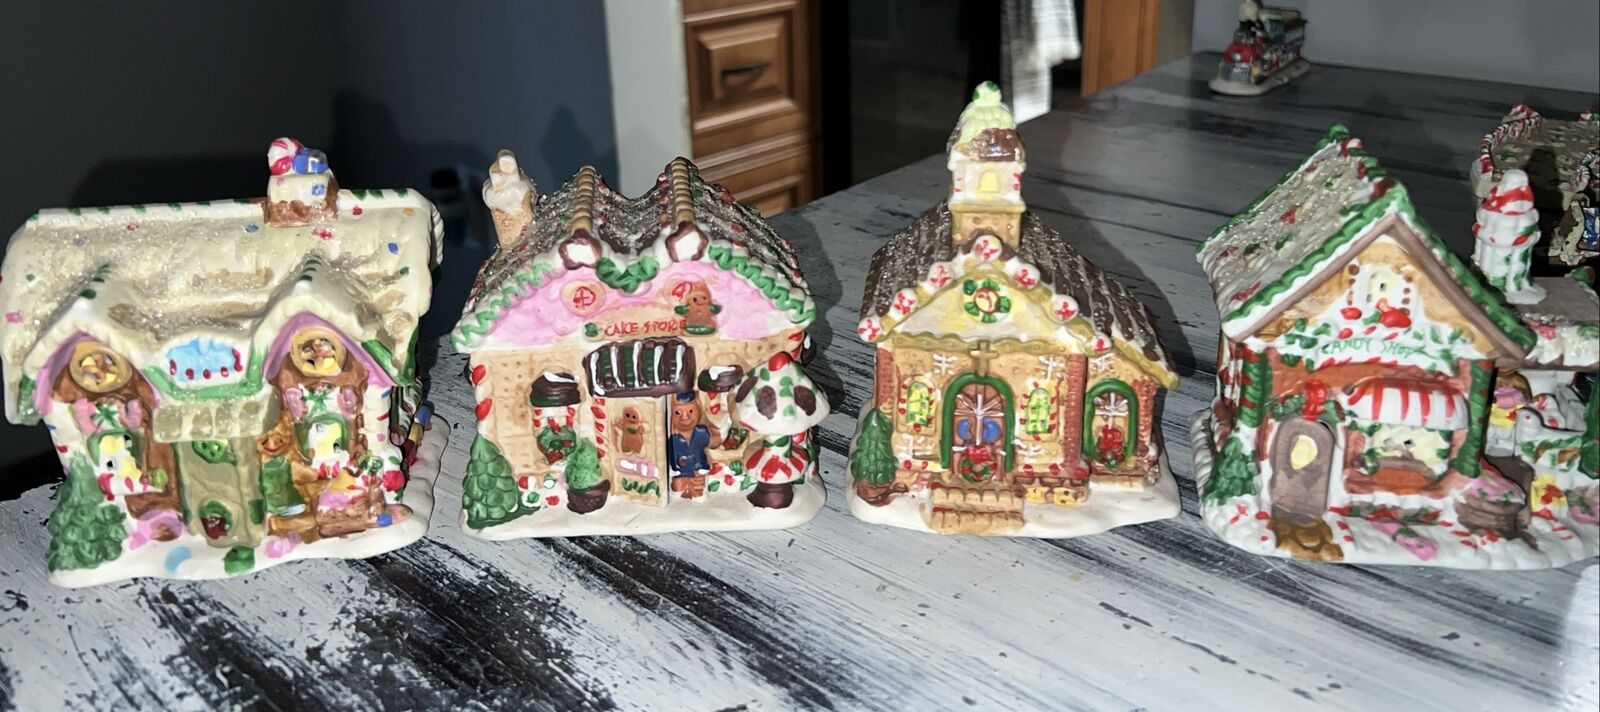 Ginger Frost Lane Holiday Christmas 2005 Gingerbread Houses Lot Of 4